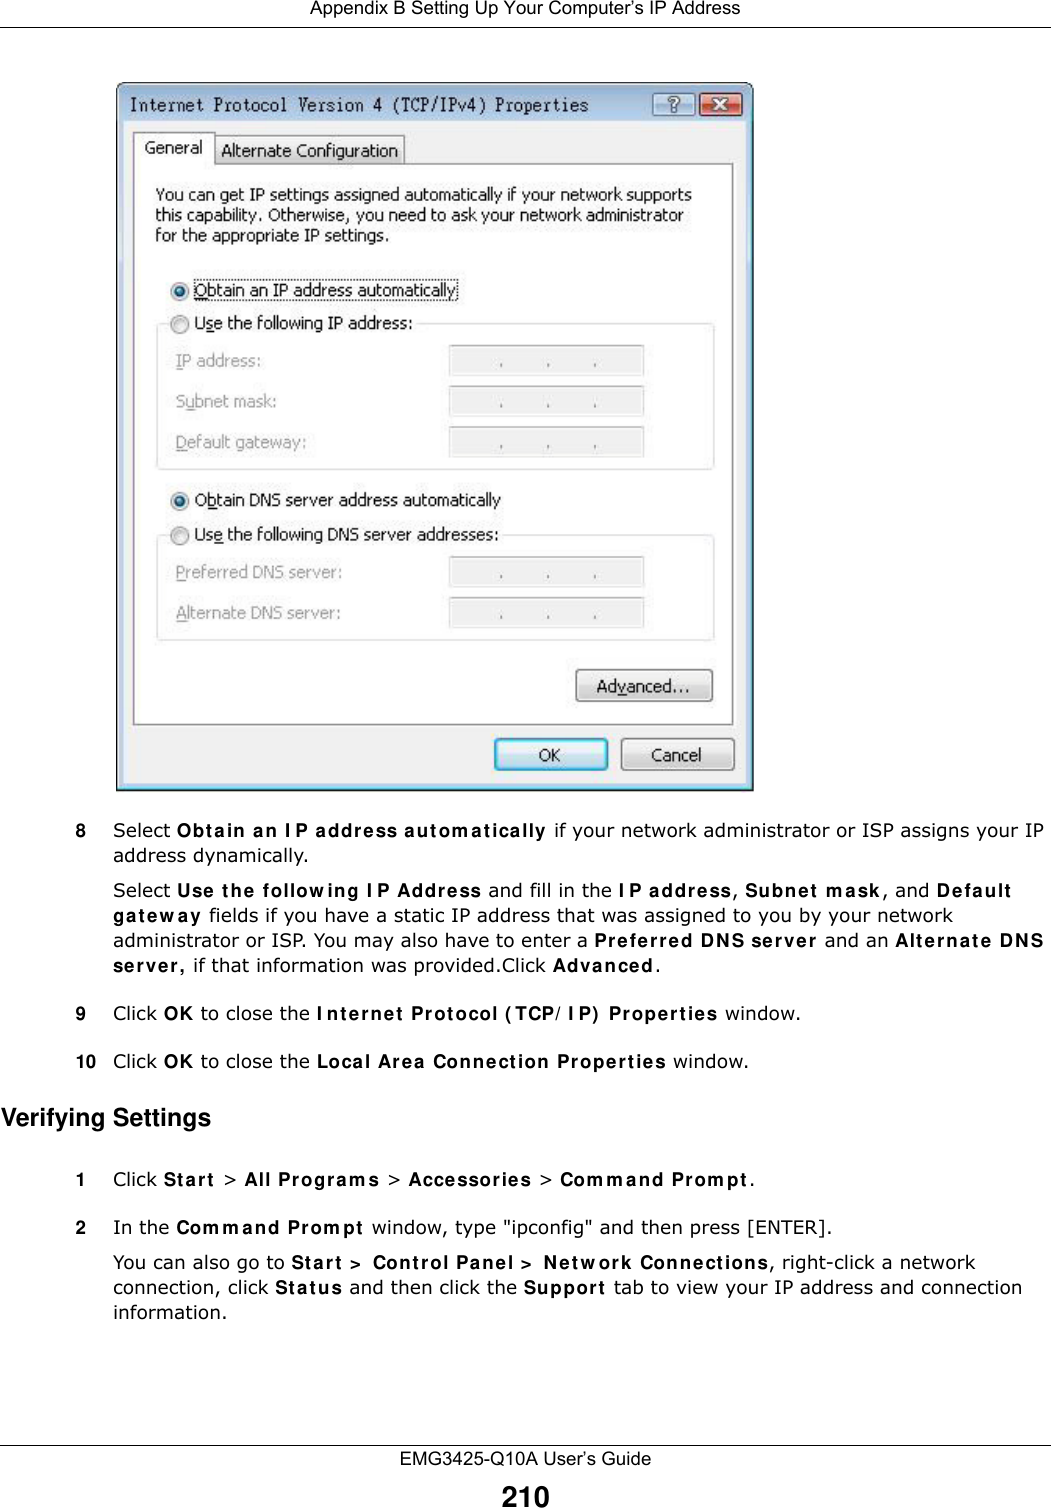 Appendix B Setting Up Your Computer’s IP AddressEMG3425-Q10A User’s Guide2108Select Obt a in a n I P a ddre ss a ut om a t ically if your network administrator or ISP assigns your IP address dynamically.Select Use t he follow ing I P Addr ess and fill in the I P address, Subne t  m a sk , and D efault  ga t e w a y  fields if you have a static IP address that was assigned to you by your network administrator or ISP. You may also have to enter a Pre fer red D N S se r ve r and an Alt e r na t e  DNS server, if that information was provided.Click Advan ced.9Click OK to close the I nt ernet  Protocol ( TCP/ I P)  Pr ope rtie s window.10 Click OK to close the Loca l Ar ea Connect ion Pr ope rtie s window.Verifying Settings1Click St a rt  &gt; All Progra m s &gt; Acce ssories &gt; Com m an d Prom pt .2In the Com m and Prom pt  window, type &quot;ipconfig&quot; and then press [ENTER]. You can also go to St a rt &gt;  Cont r ol Pa nel &gt;  Net w ork Con ne ct ions, right-click a network connection, click St a t u s and then click the Suppor t  tab to view your IP address and connection information.